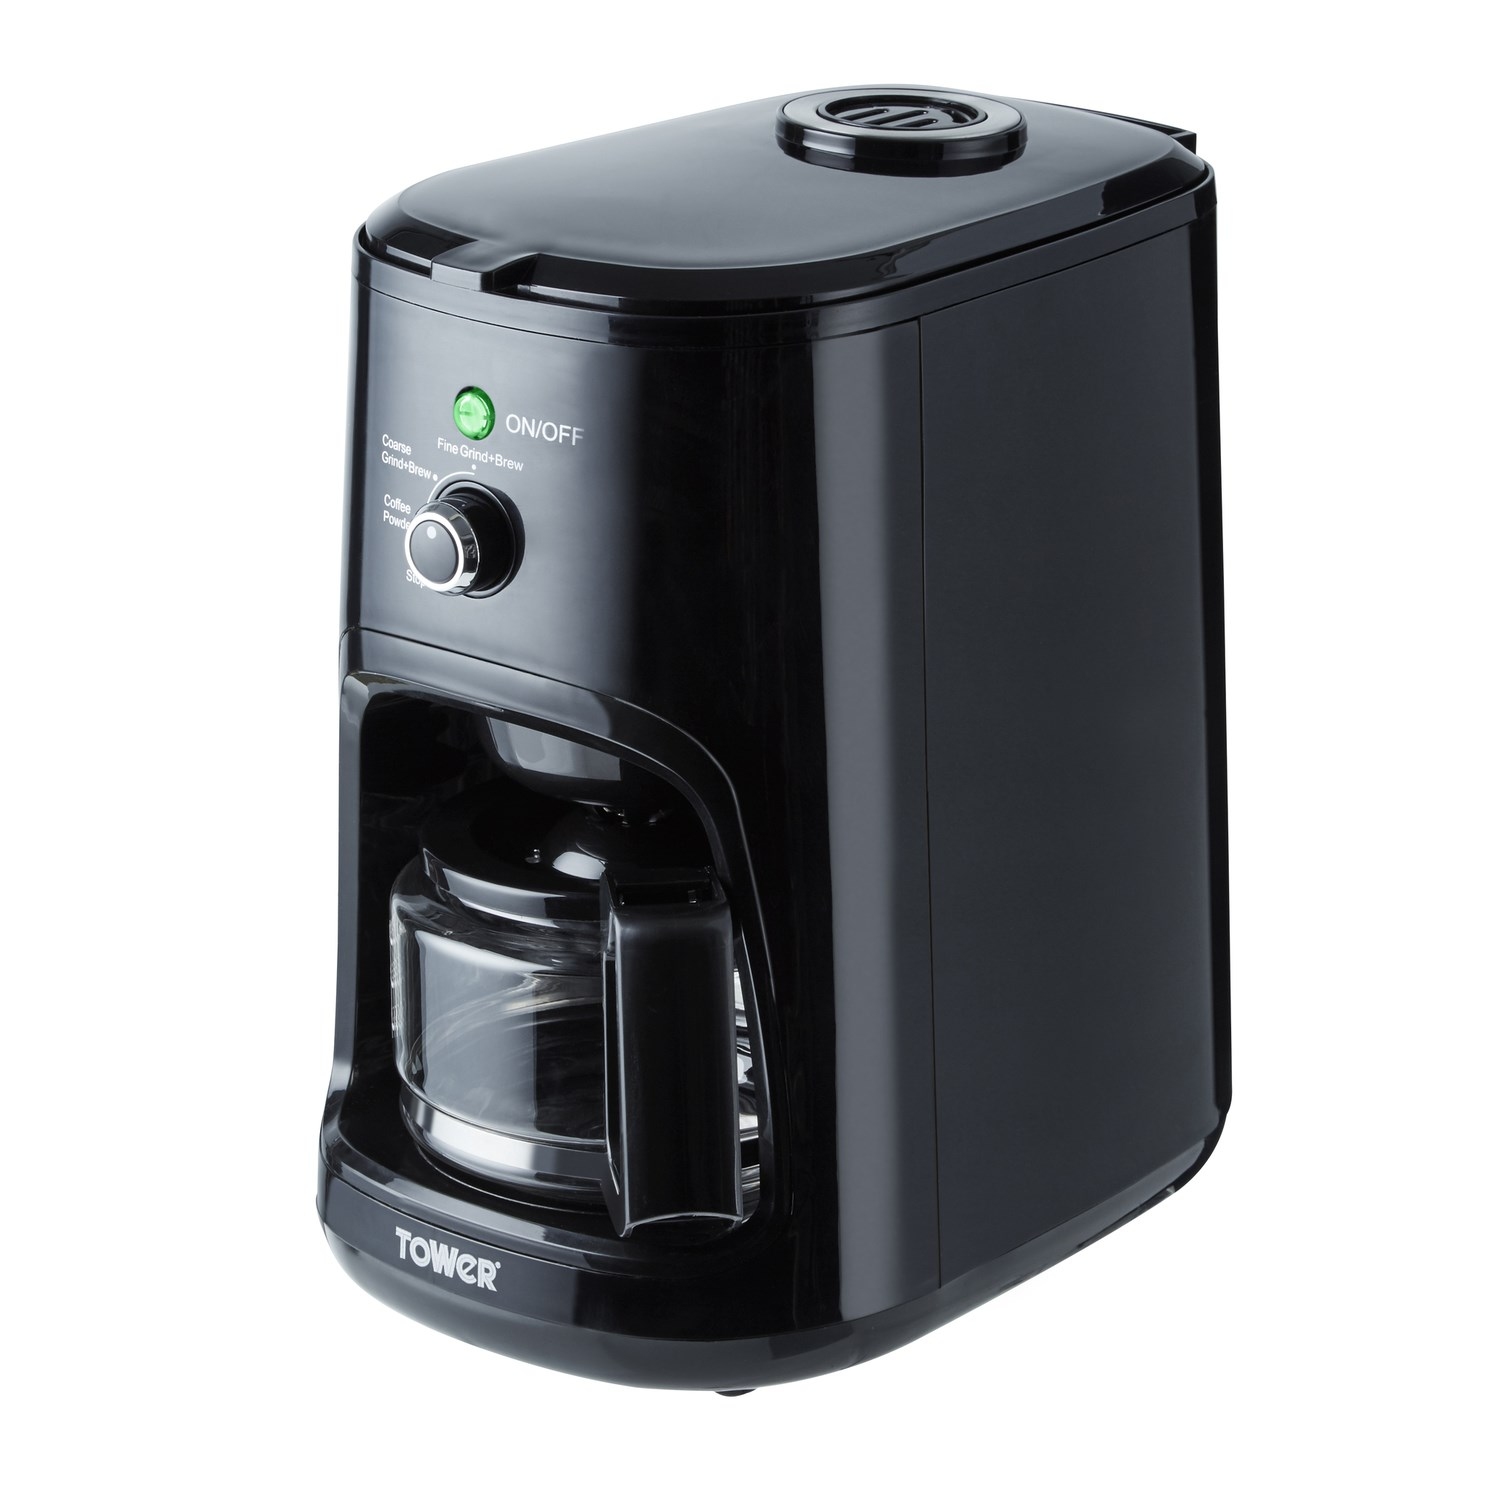 Tower Bean To Cup Coffee Maker (black) - 0